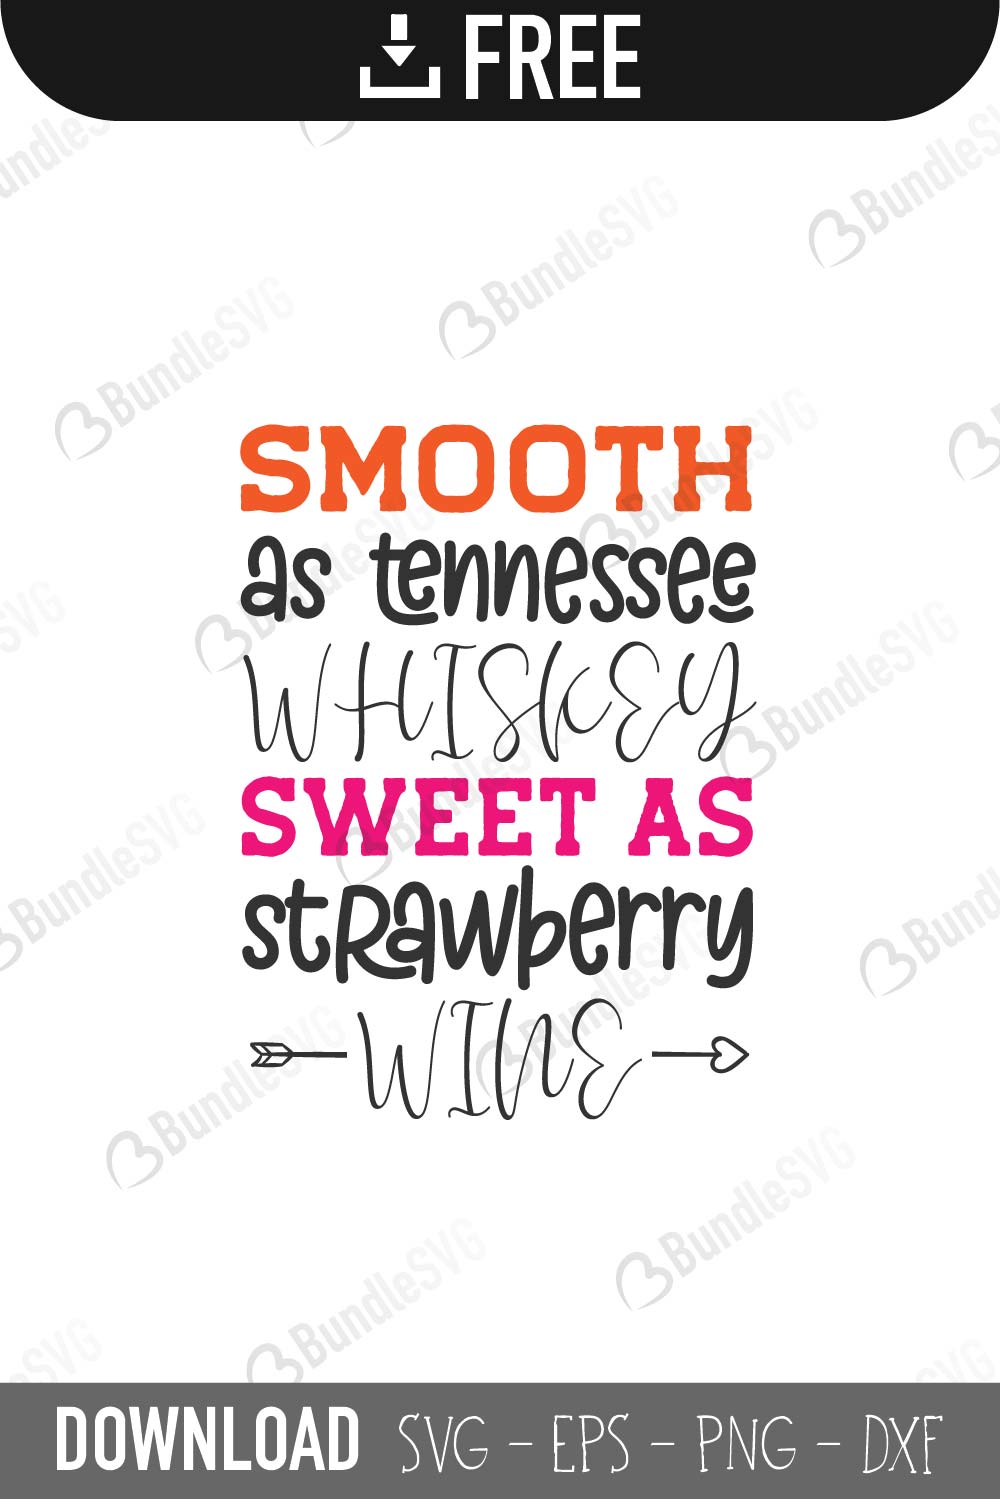 Download Smooth As Tennessee Whiskey Svg Cut Files Free Download Bundlesvg